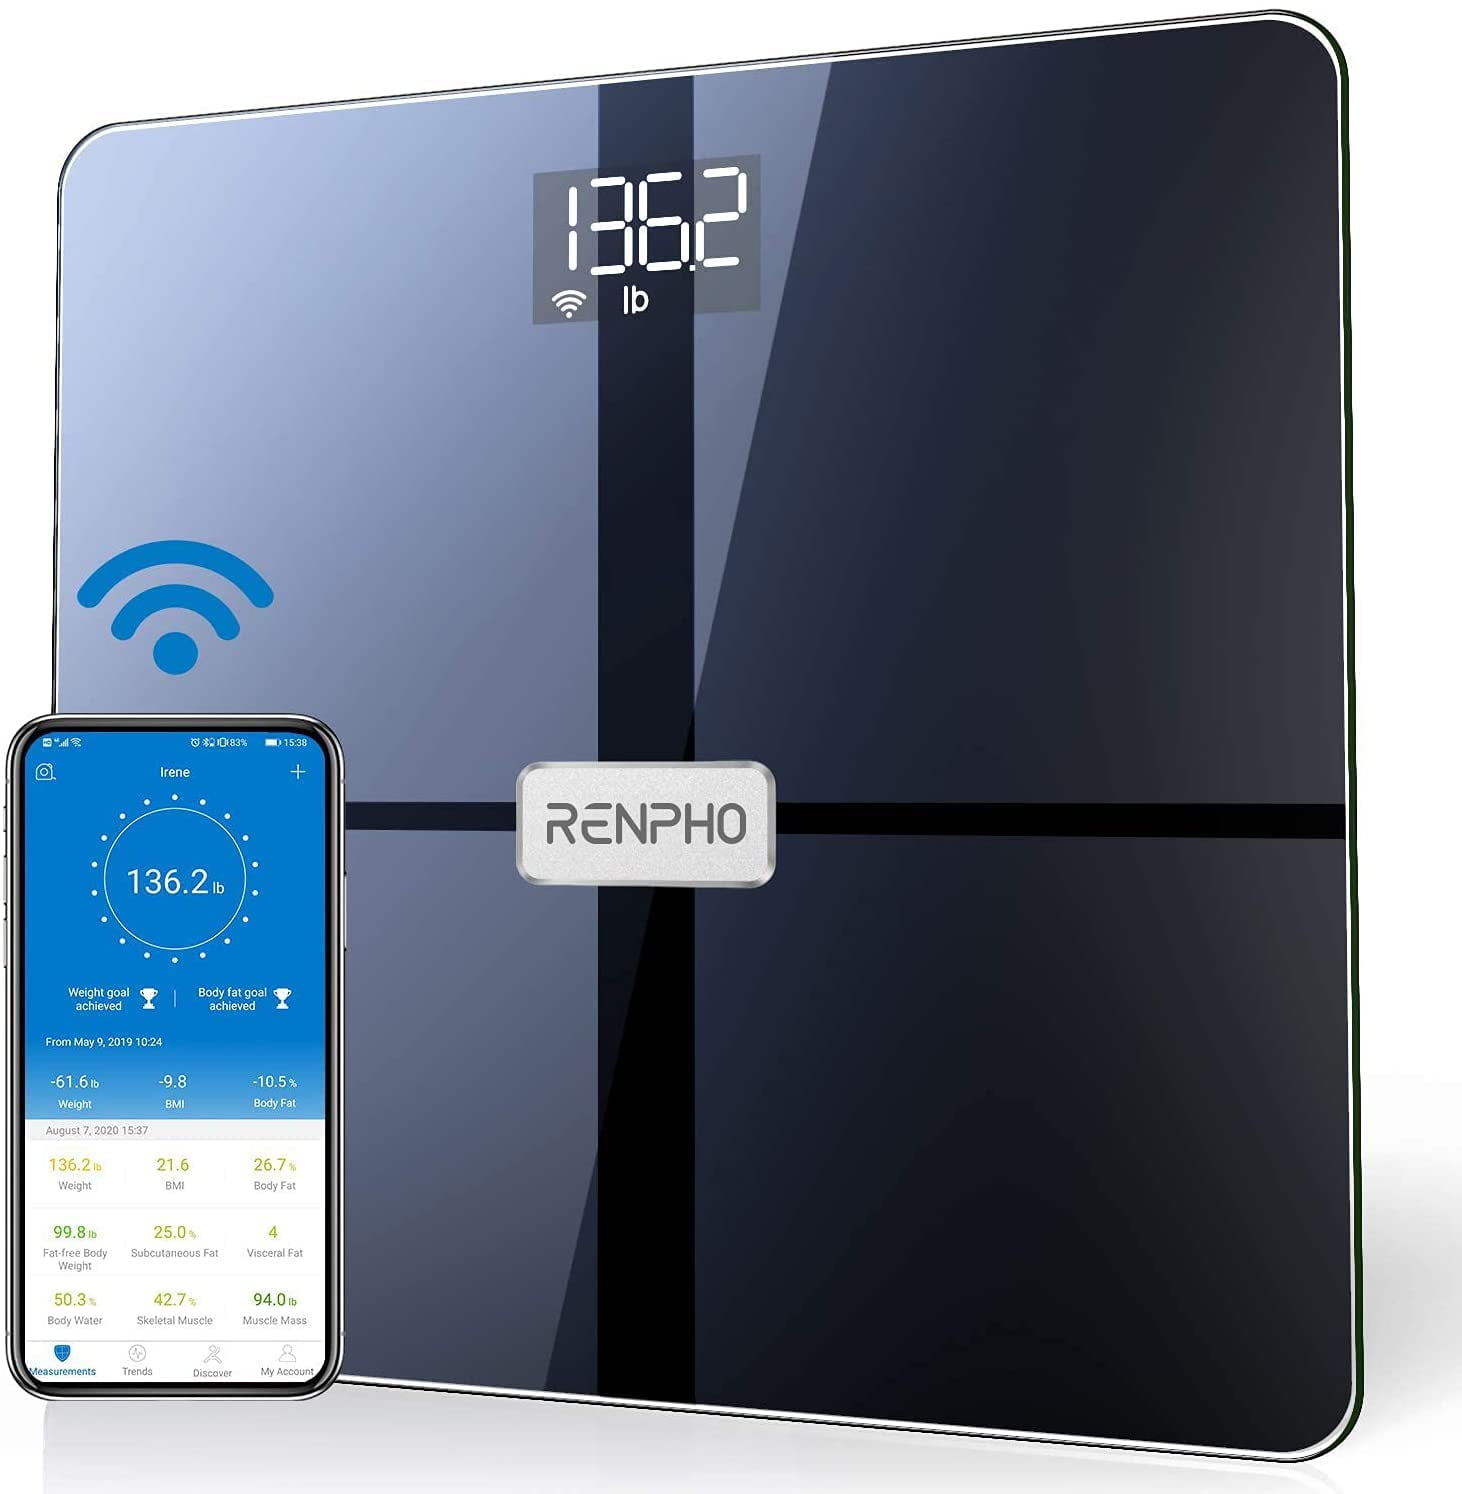 RENPHO Wi-Fi Bluetooth Body Fat Scale, Body Weight Scale, Smart BMI Scale,  Digital Bathroom Scale, Wireless Body Composition Analysis & Health Monitor  